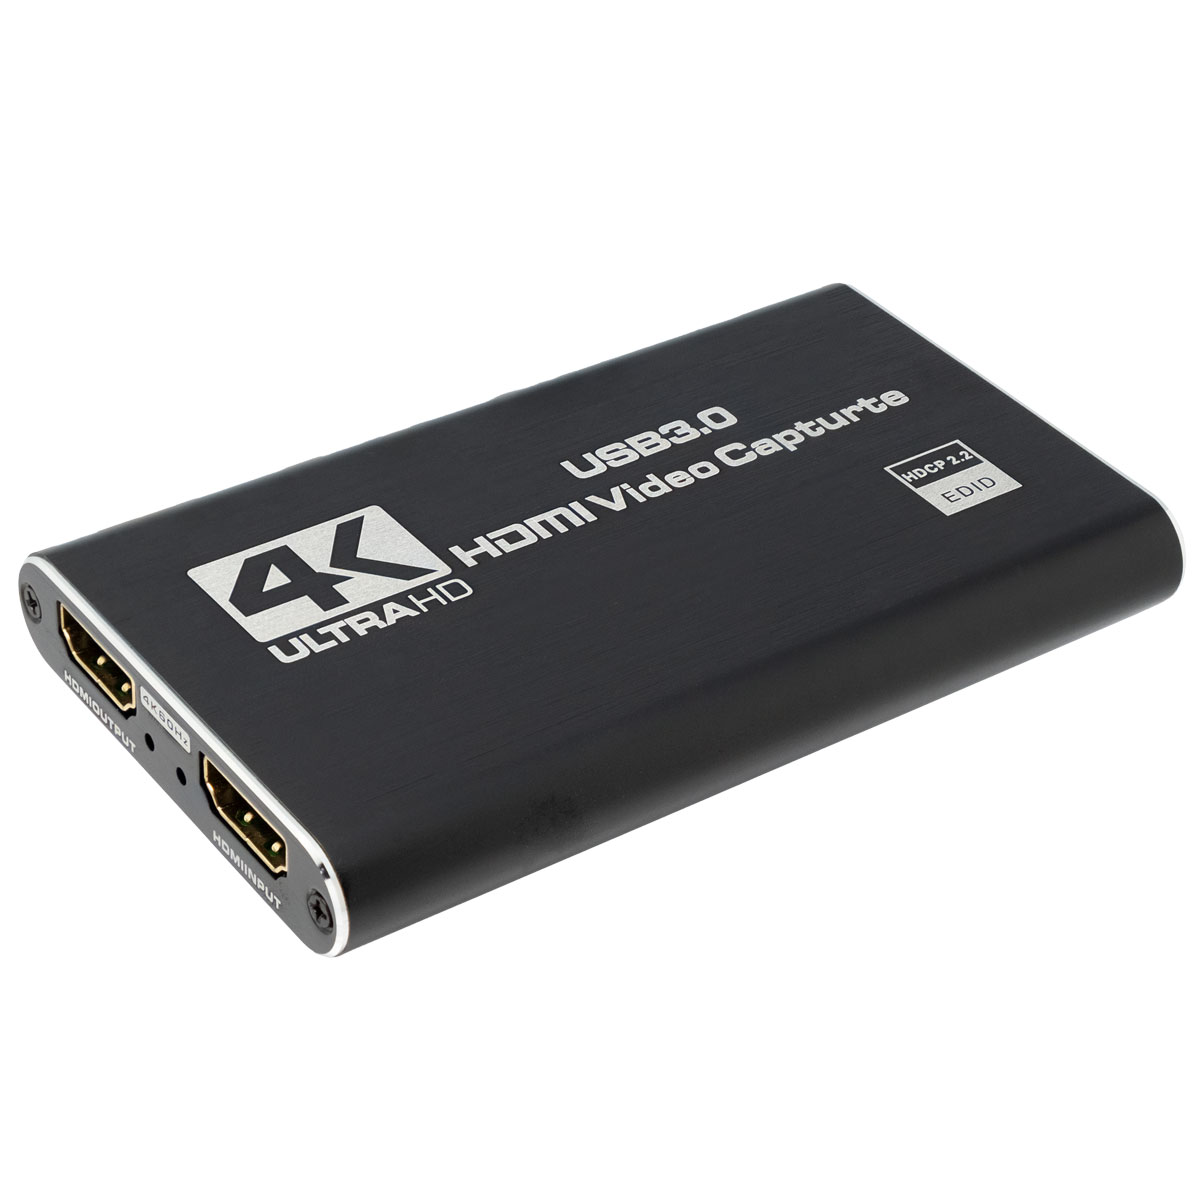 HDMI and microphone to USB capture card, 4K@60Hz with video output loop